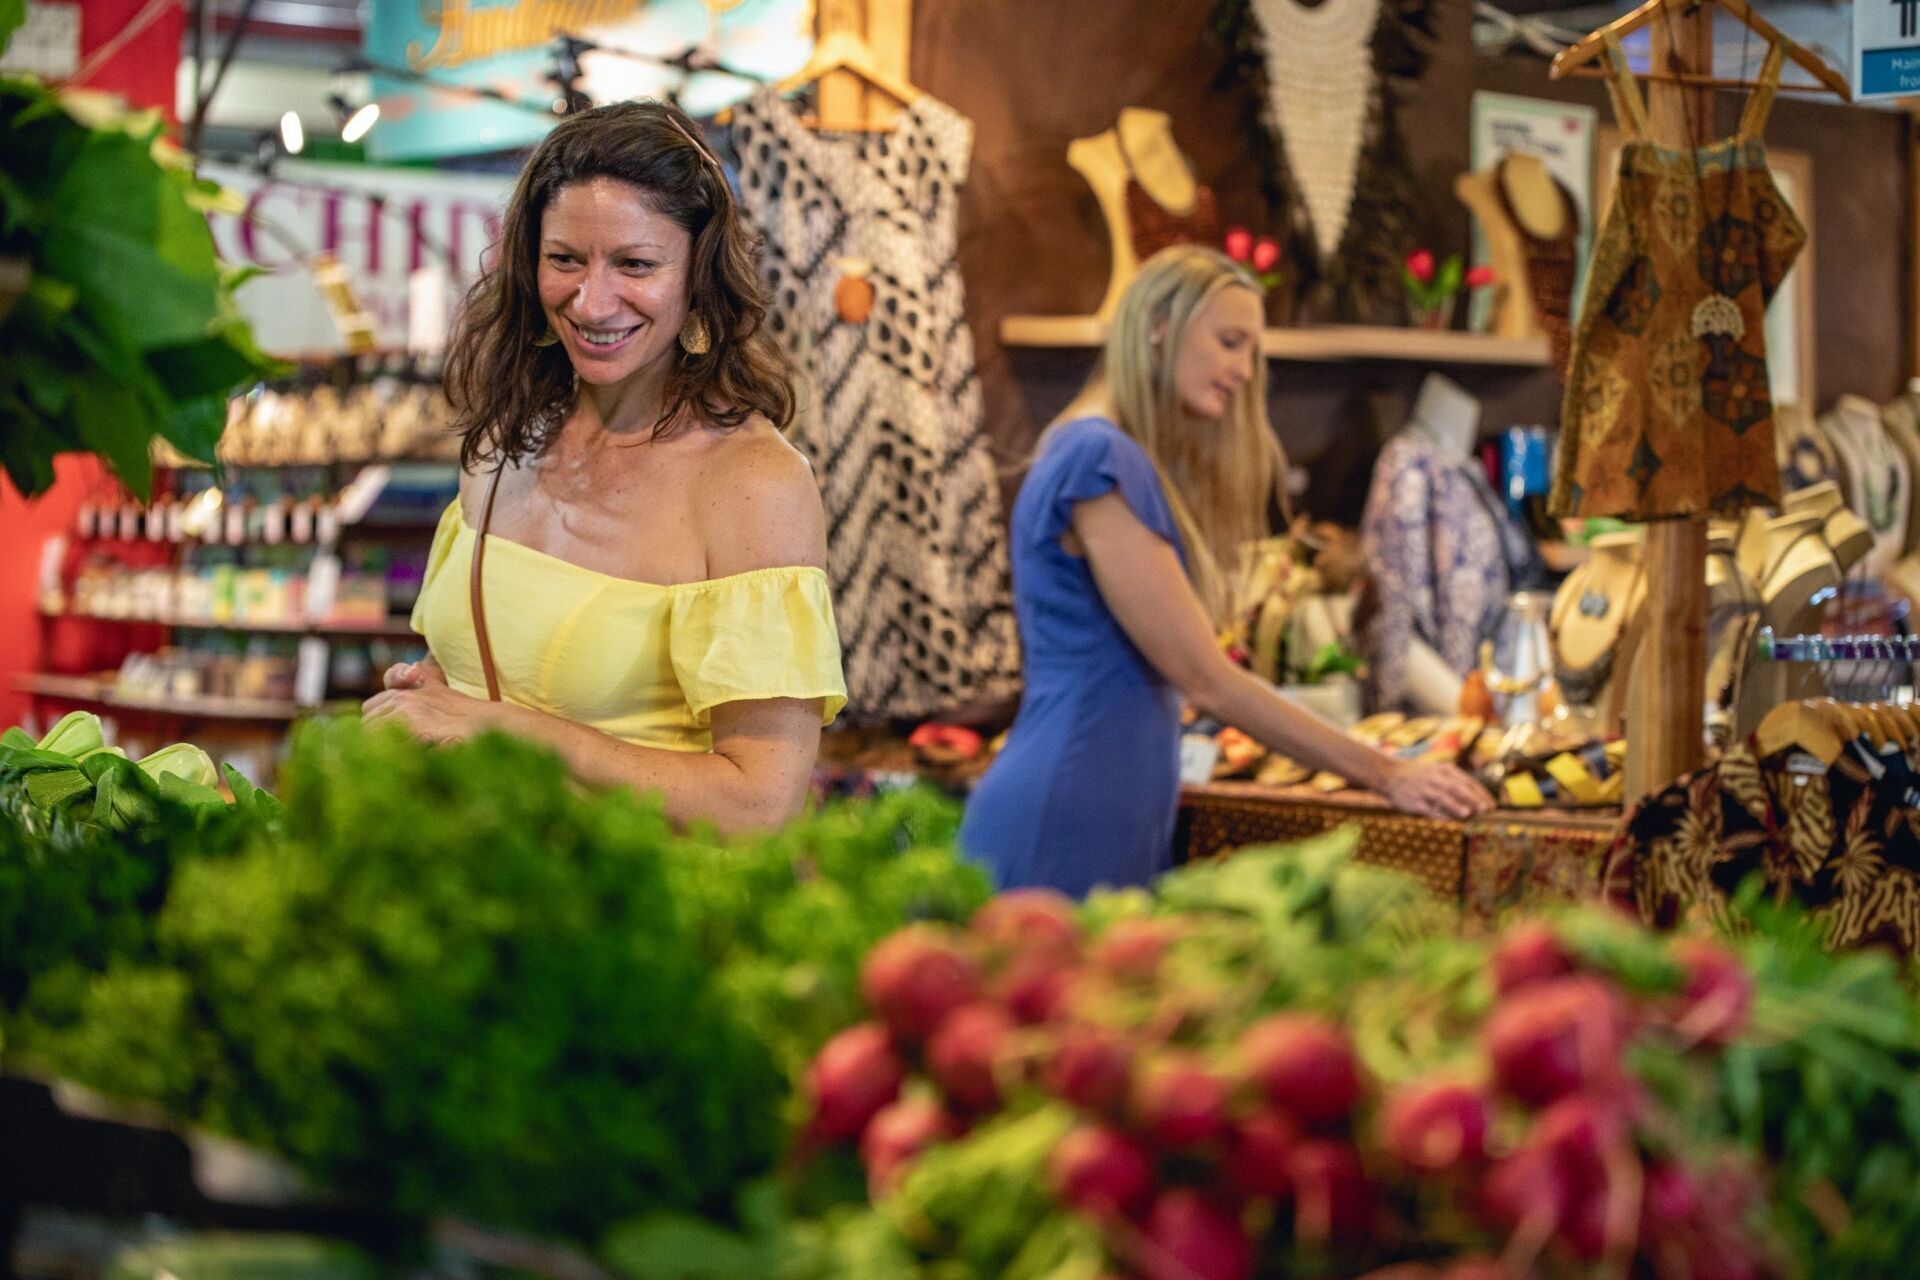 Rusty's Food Market Walking Tour is a Foodlovers must-do in Cairns